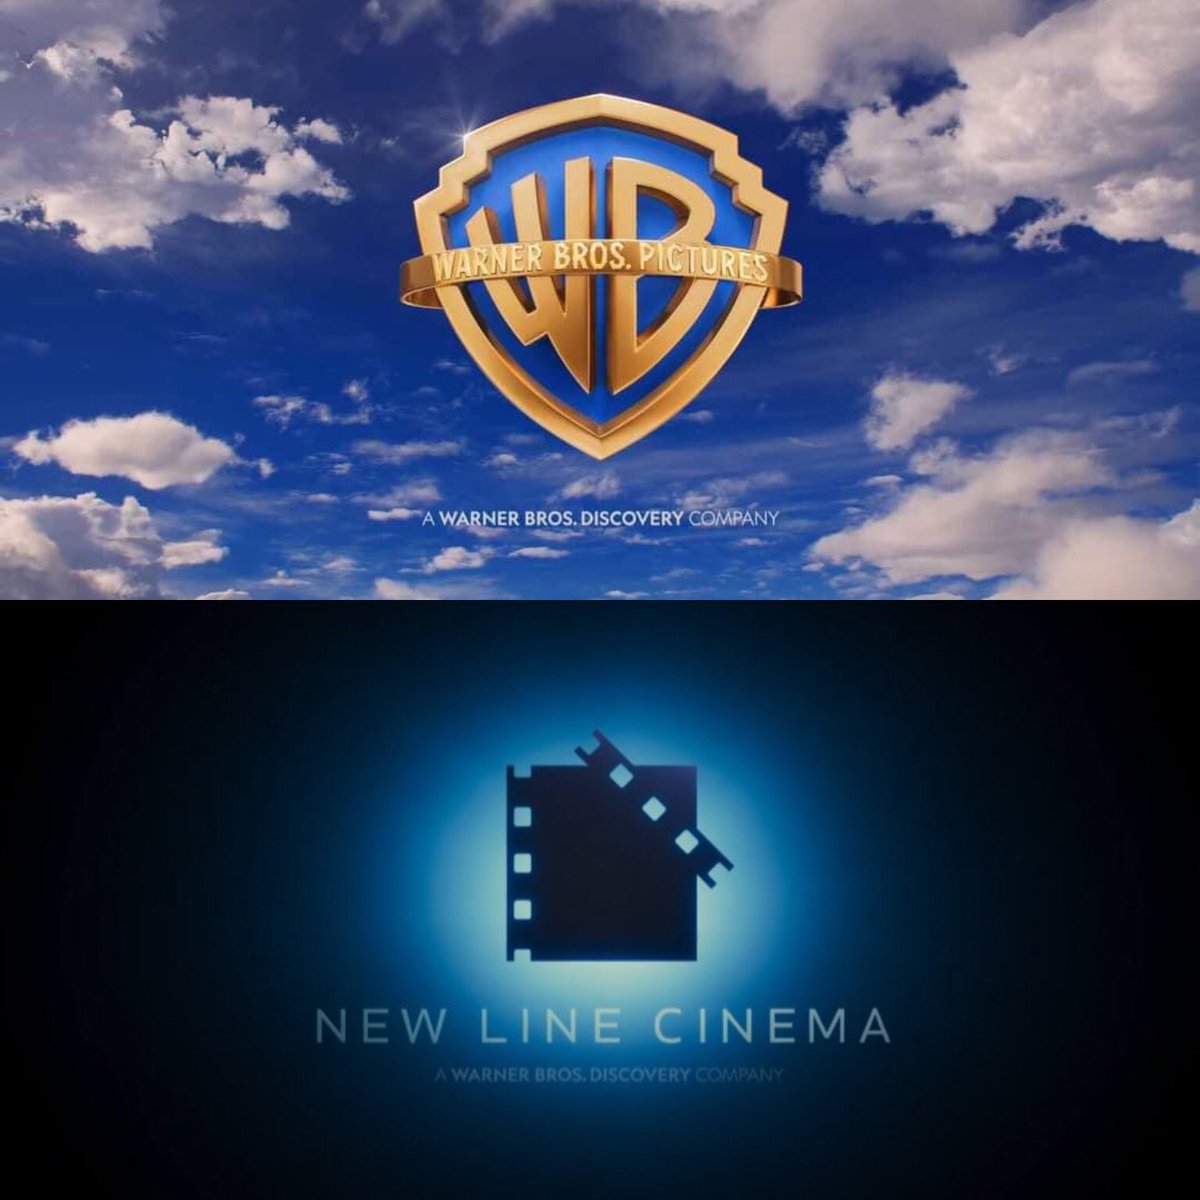 We literally got updated logo recreations of both @wbpictures and @newlinecinema 🎥